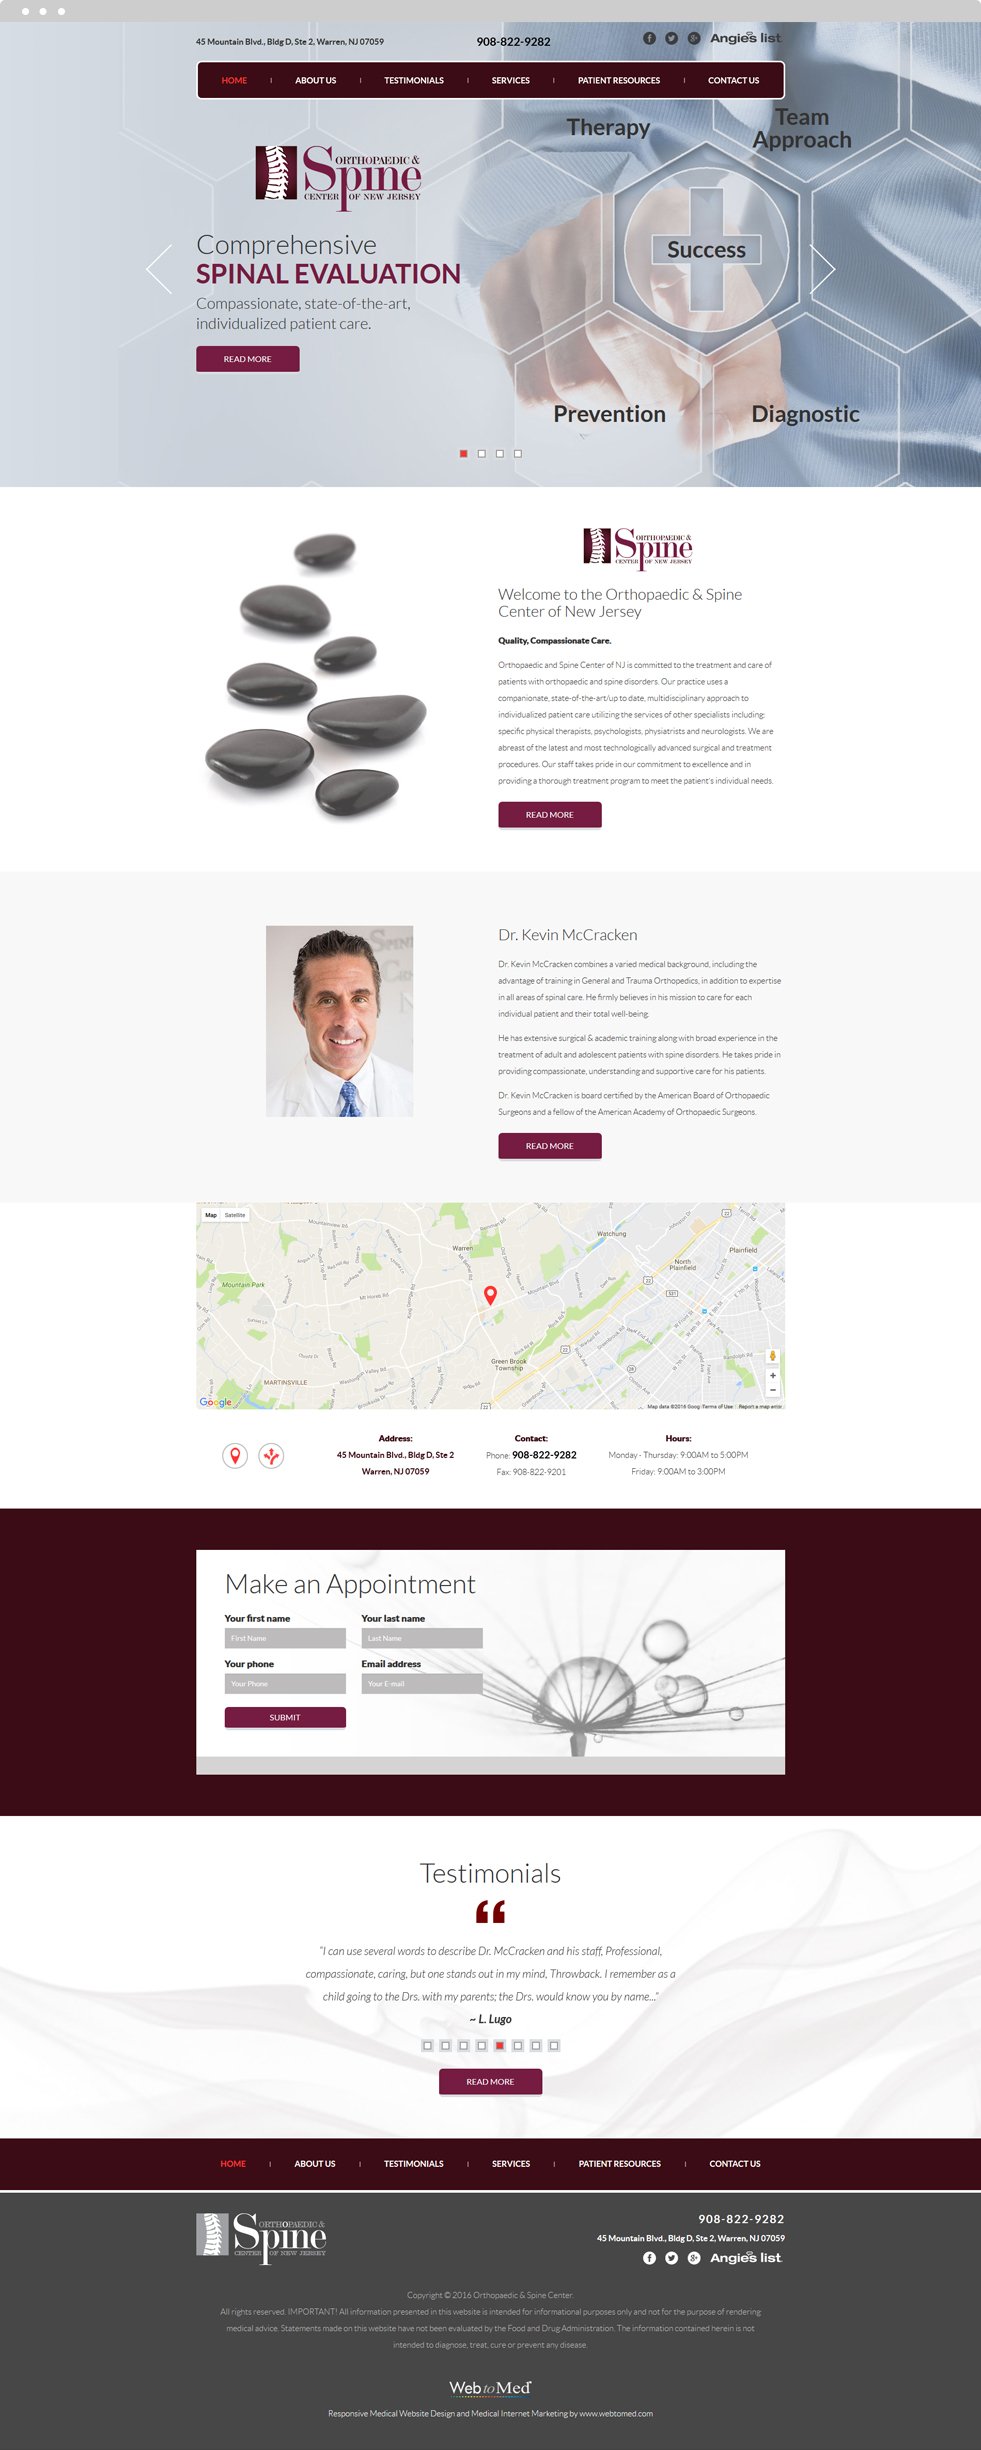 Orthopedic Website Design - Orthopaedic & Spine Center of New Jersey - Homepage